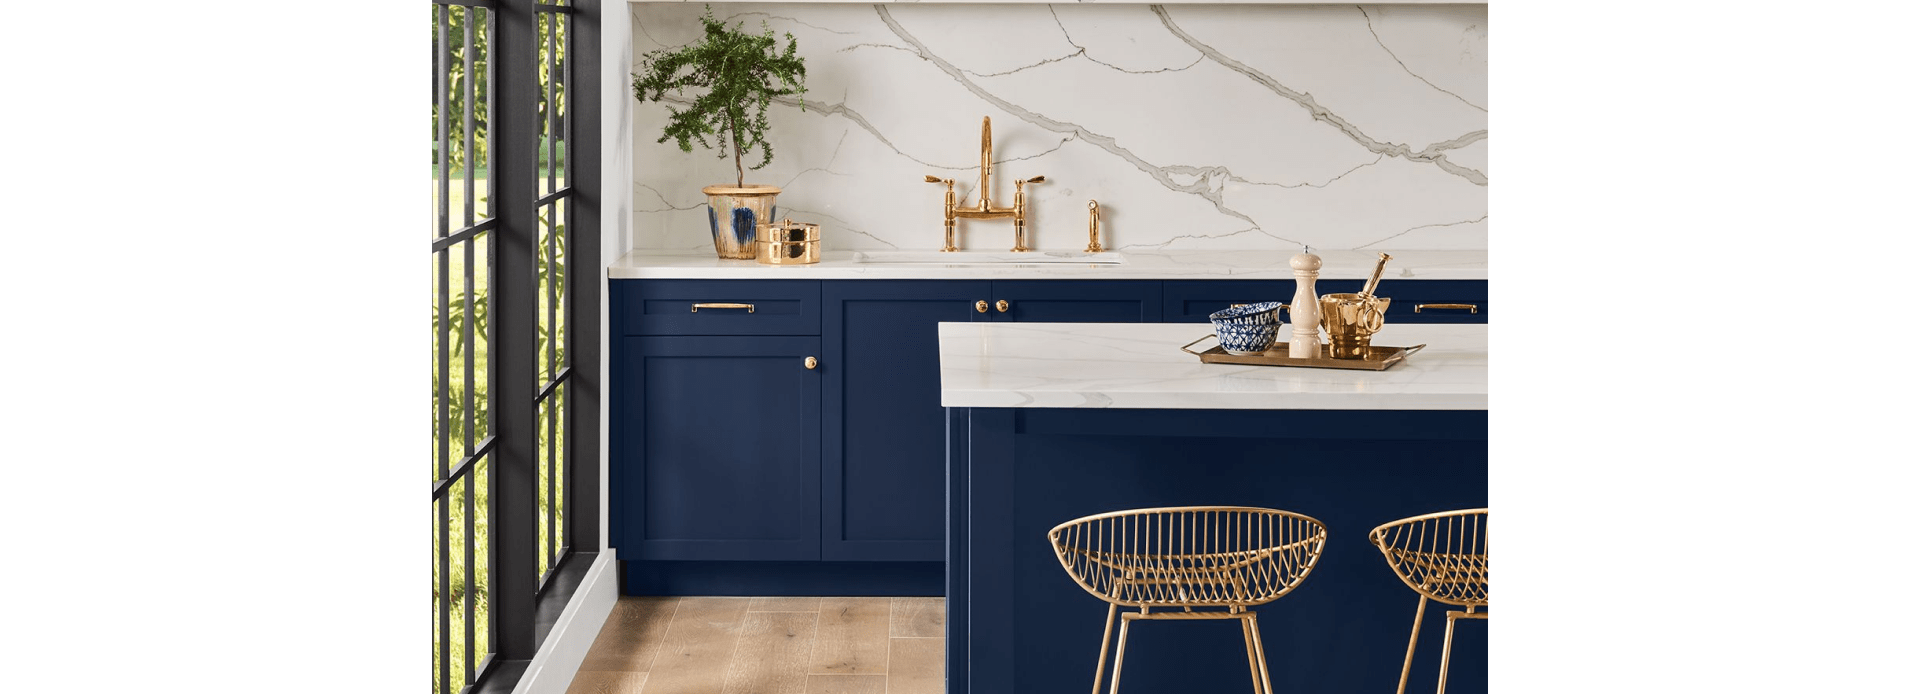 Kitchen with Sherwin Williams 2020 Color of the Year Naval SW 6244 painted cabinets and island, white marble backsplash, and gold accents. 